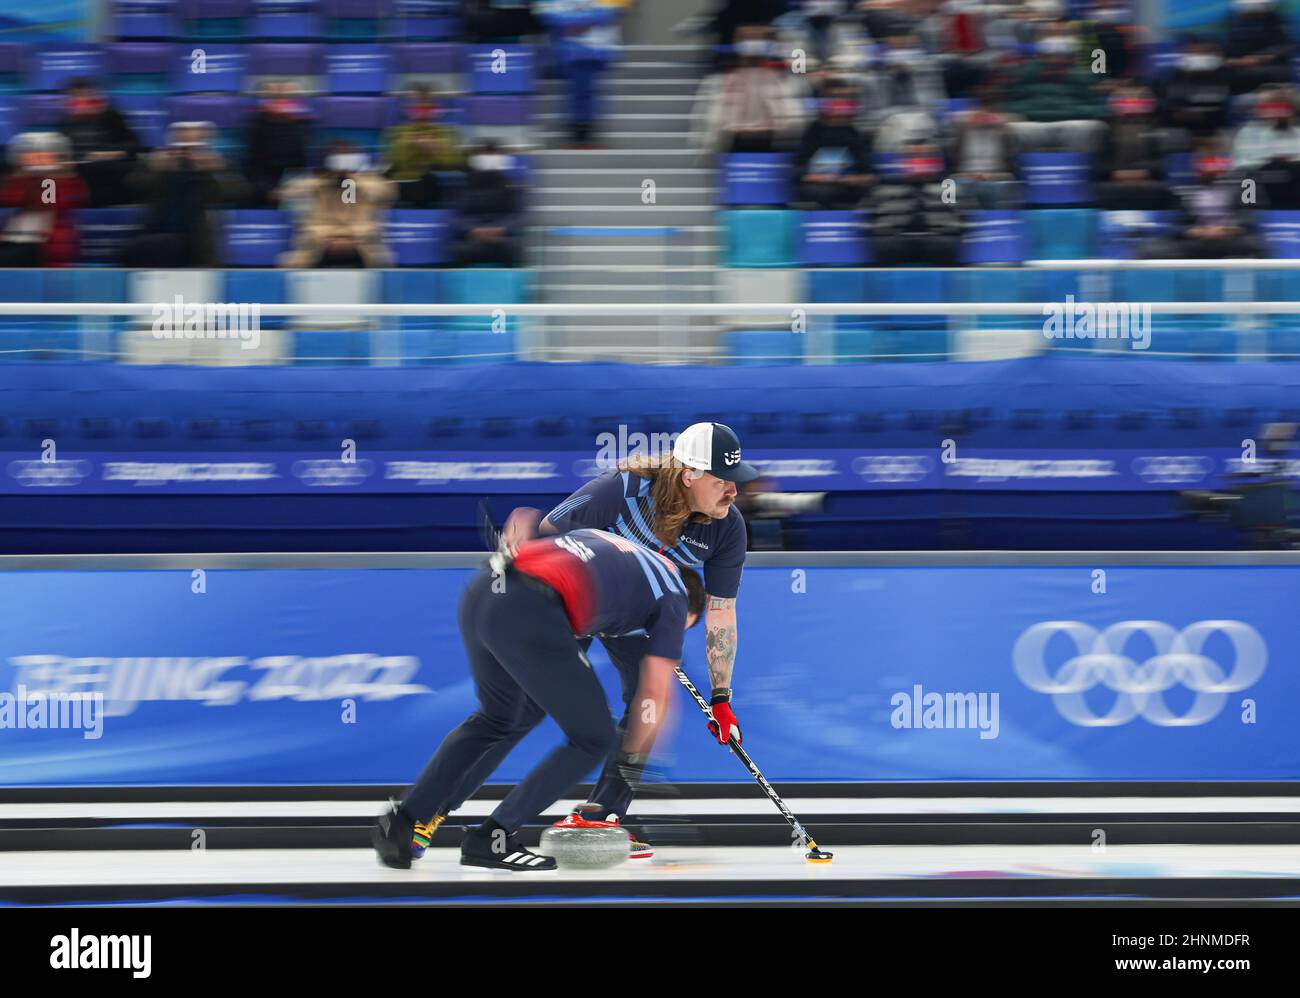 Beijing, China. 17th Feb, 2022. Matt Hamilton (Rear) and John Landsteiner of the United States compete during the curling men's semifinals of the Beijing 2022 Winter Olympics between the United States and Britain at the National Aquatics center in Beijing, China, Feb.17, 2022. Credit: Wang Jingqiang/Xinhua/Alamy Live News Stock Photo